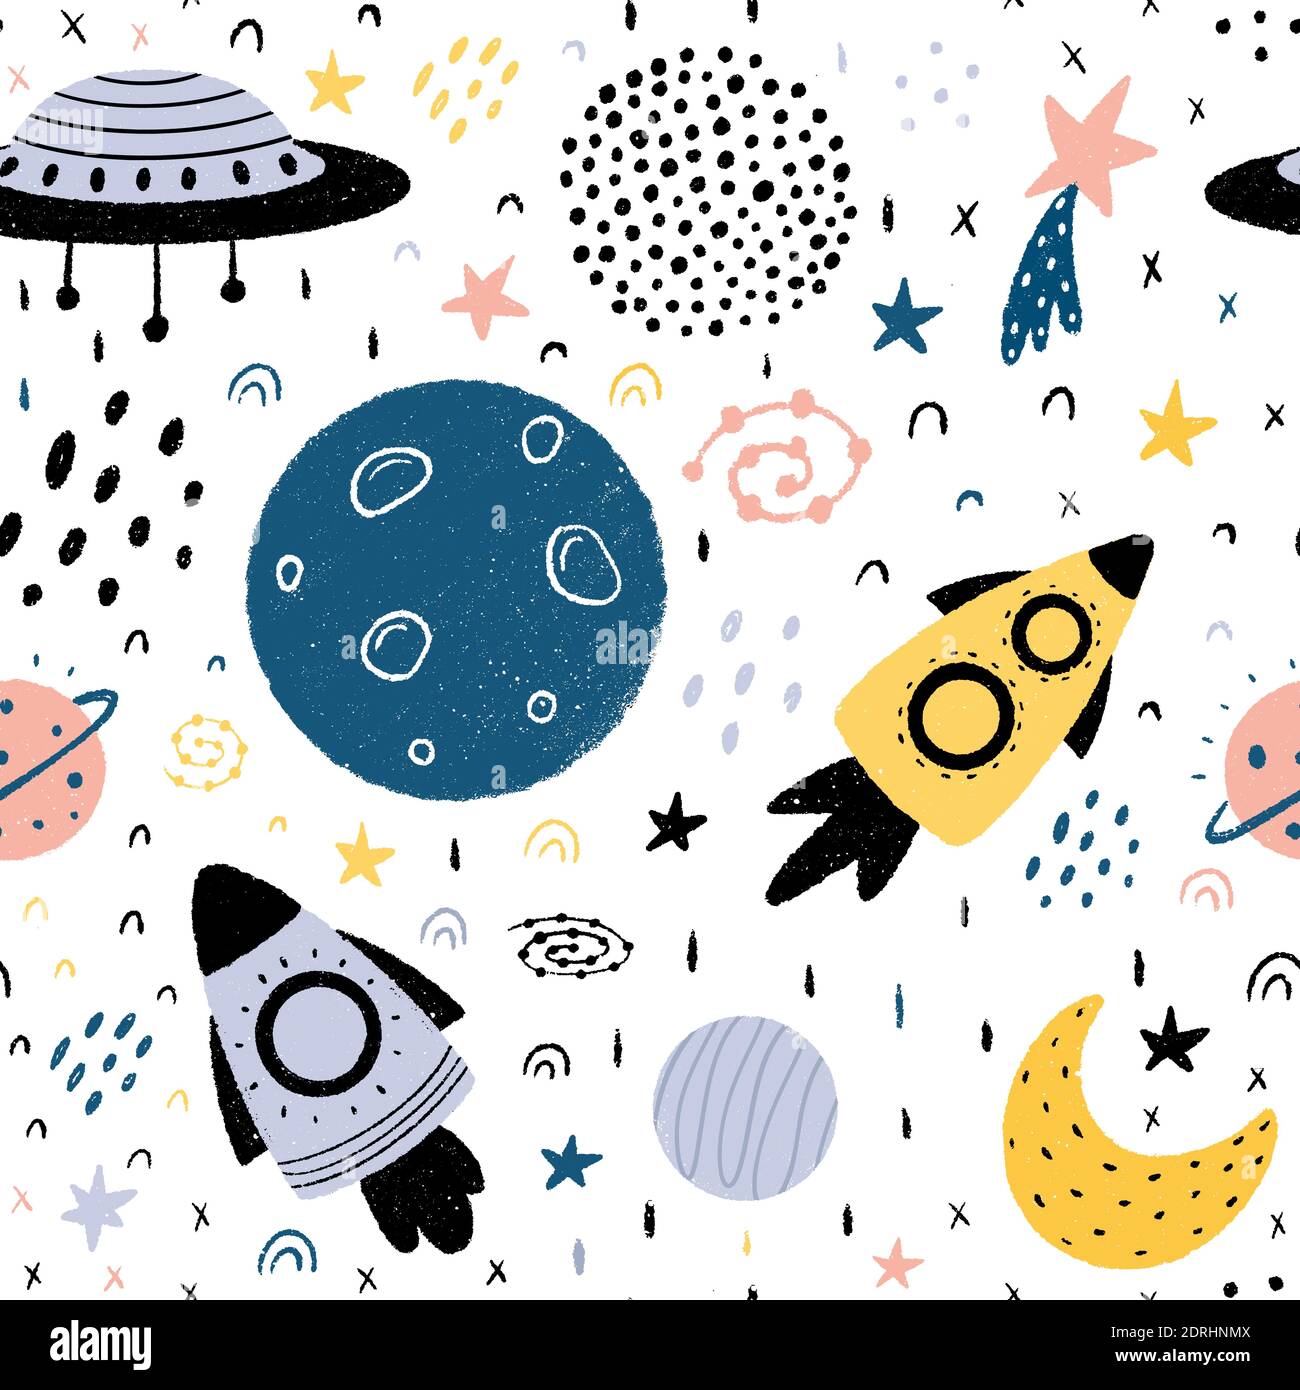 Space seamless pattern with spaceships, planets, moon, stars, stardust, galaxies and abstract elements. Hand drawn Scandinavian style vector illustrat Stock Vector